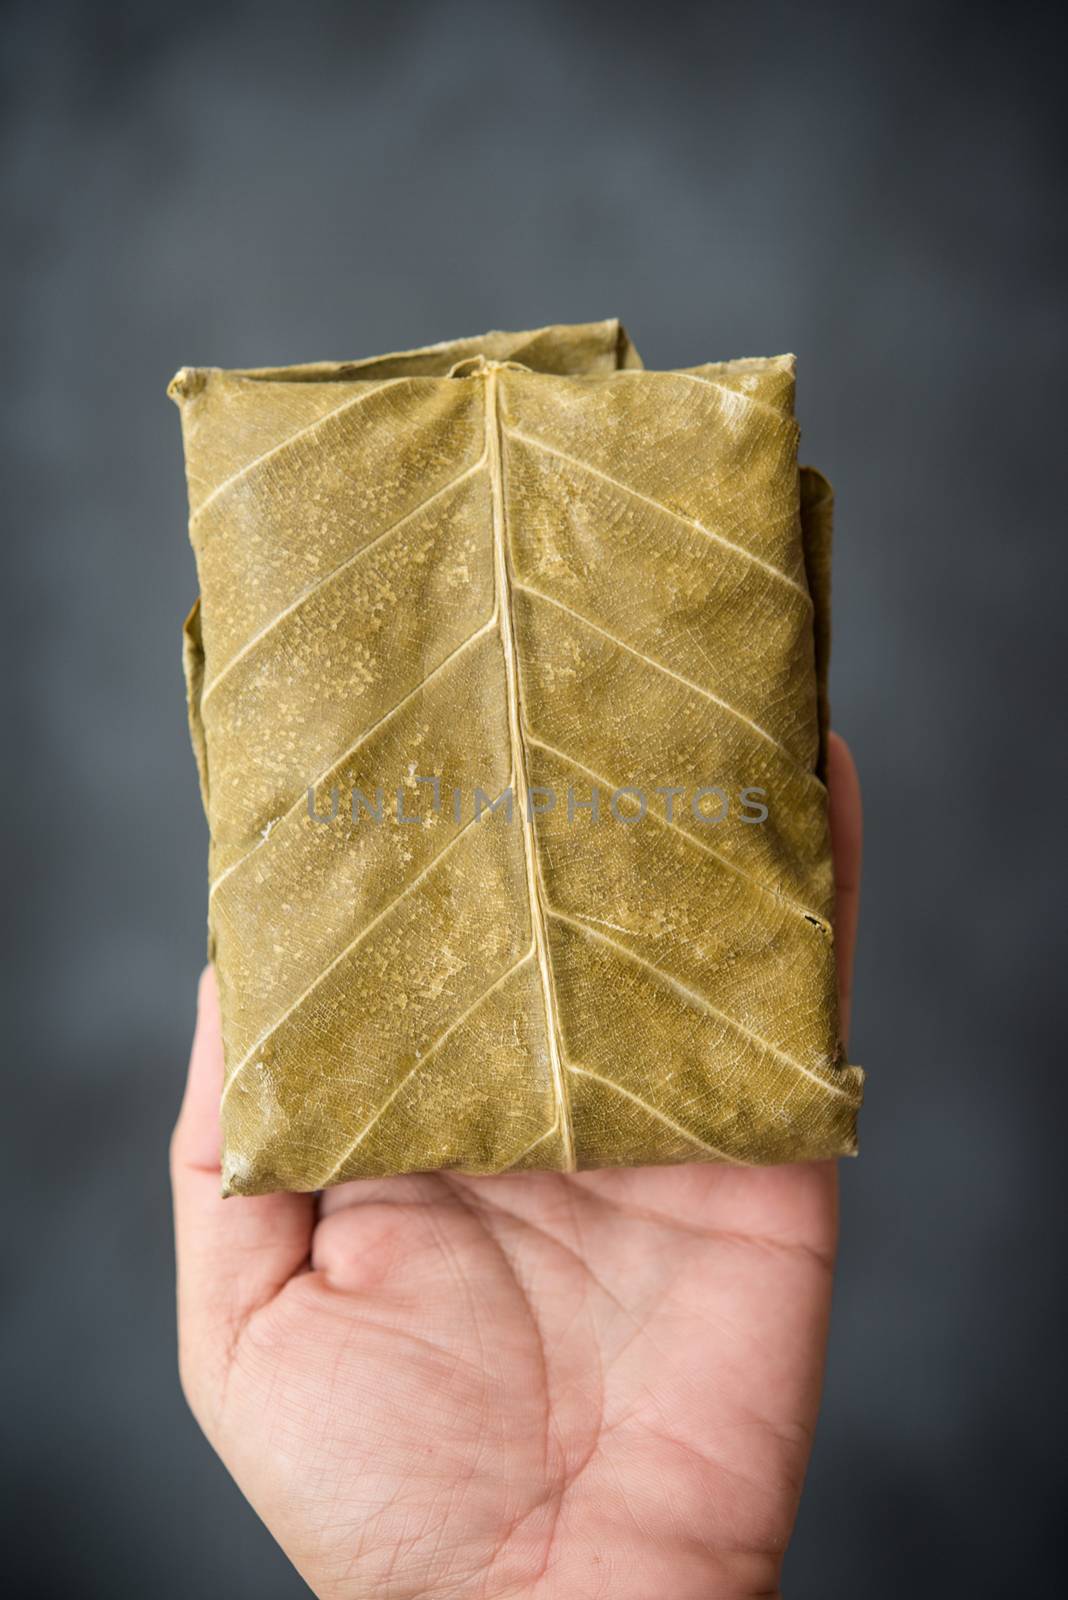 Raw tempeh wrapped in leaf on hand. by szefei